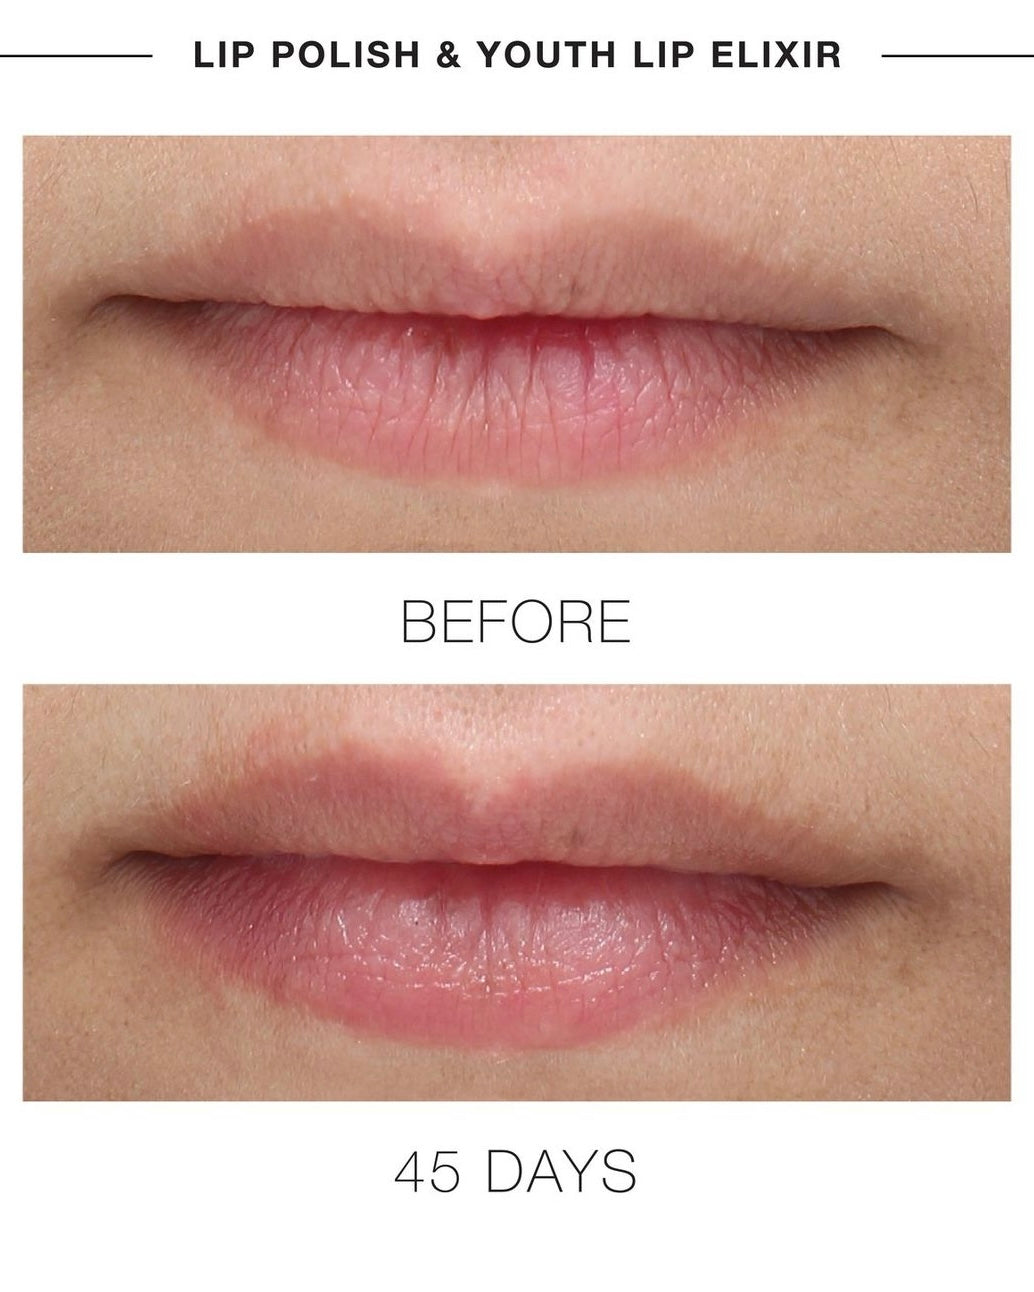 iS Clinical Lip Duo Set 15g 3.5g